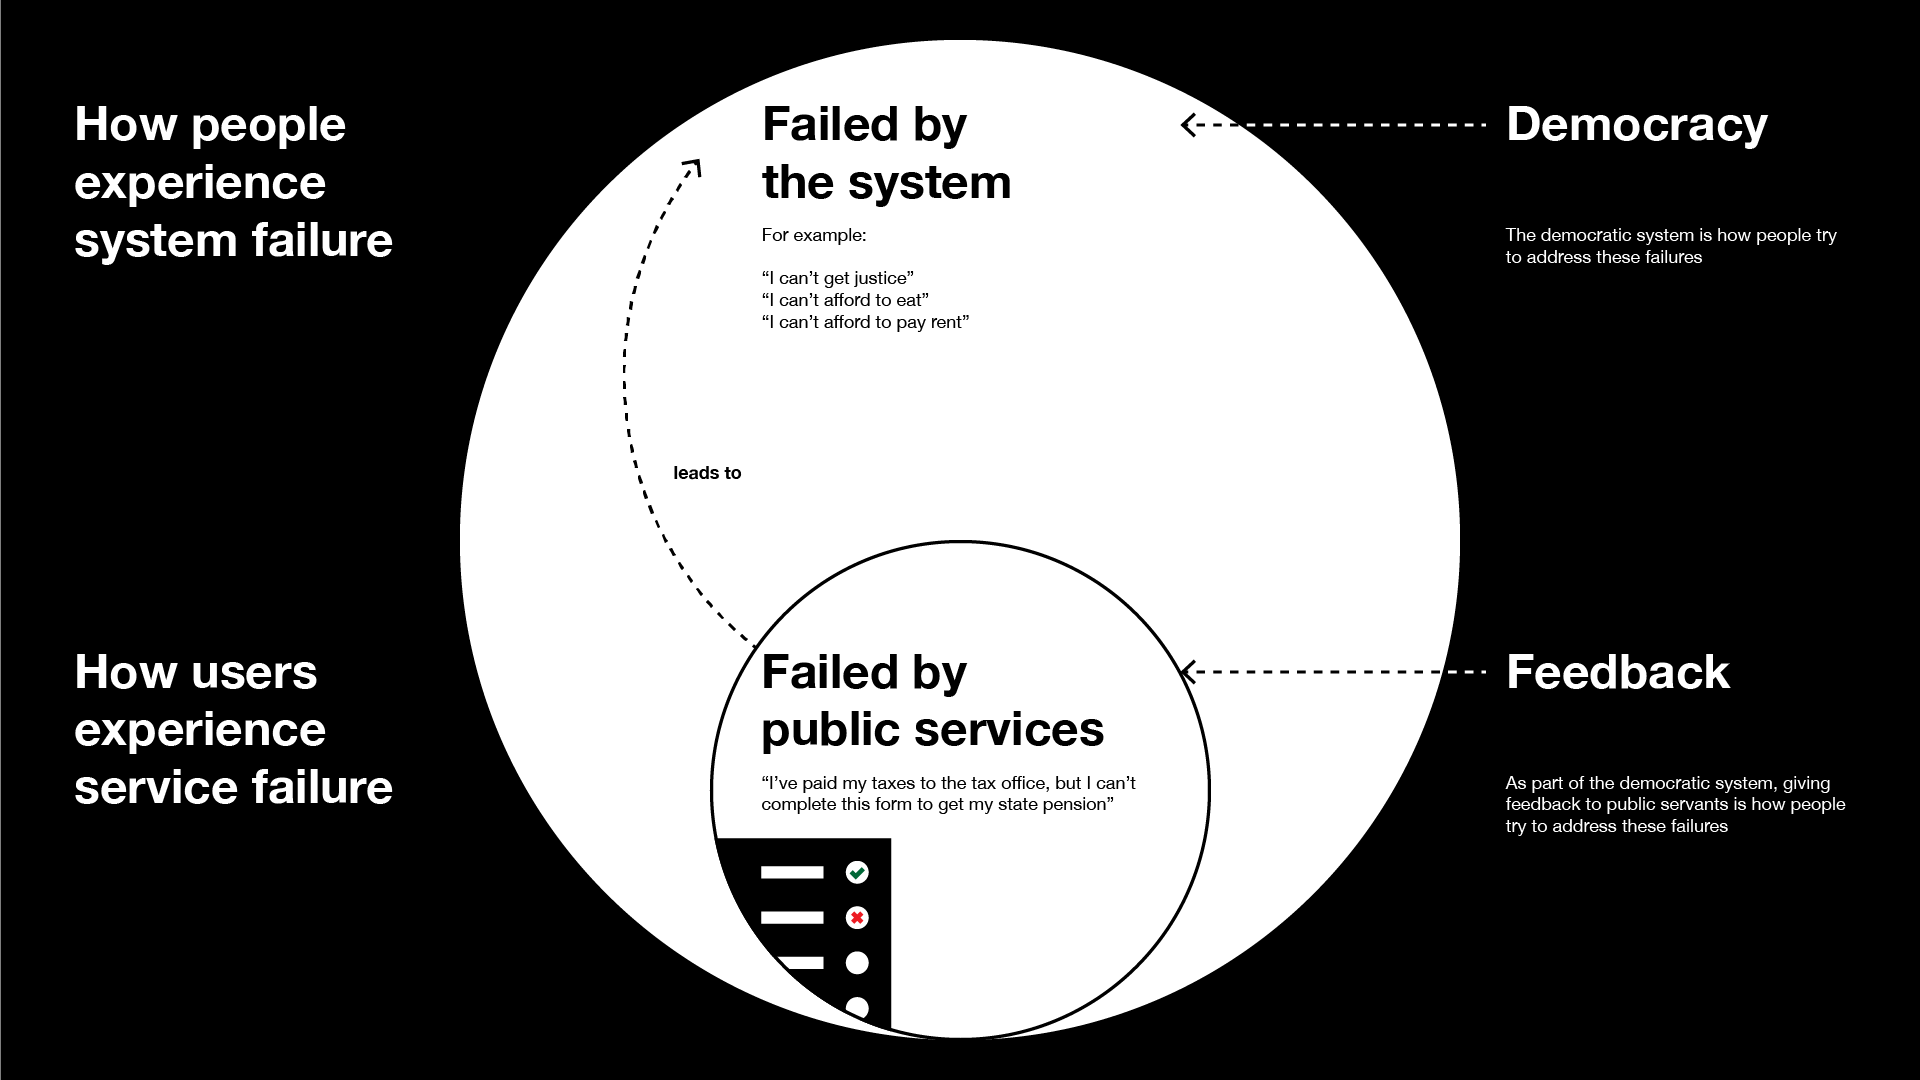 Large circle labelled 'failed by the system' contains a smaller circle labelled 'failed by public services''